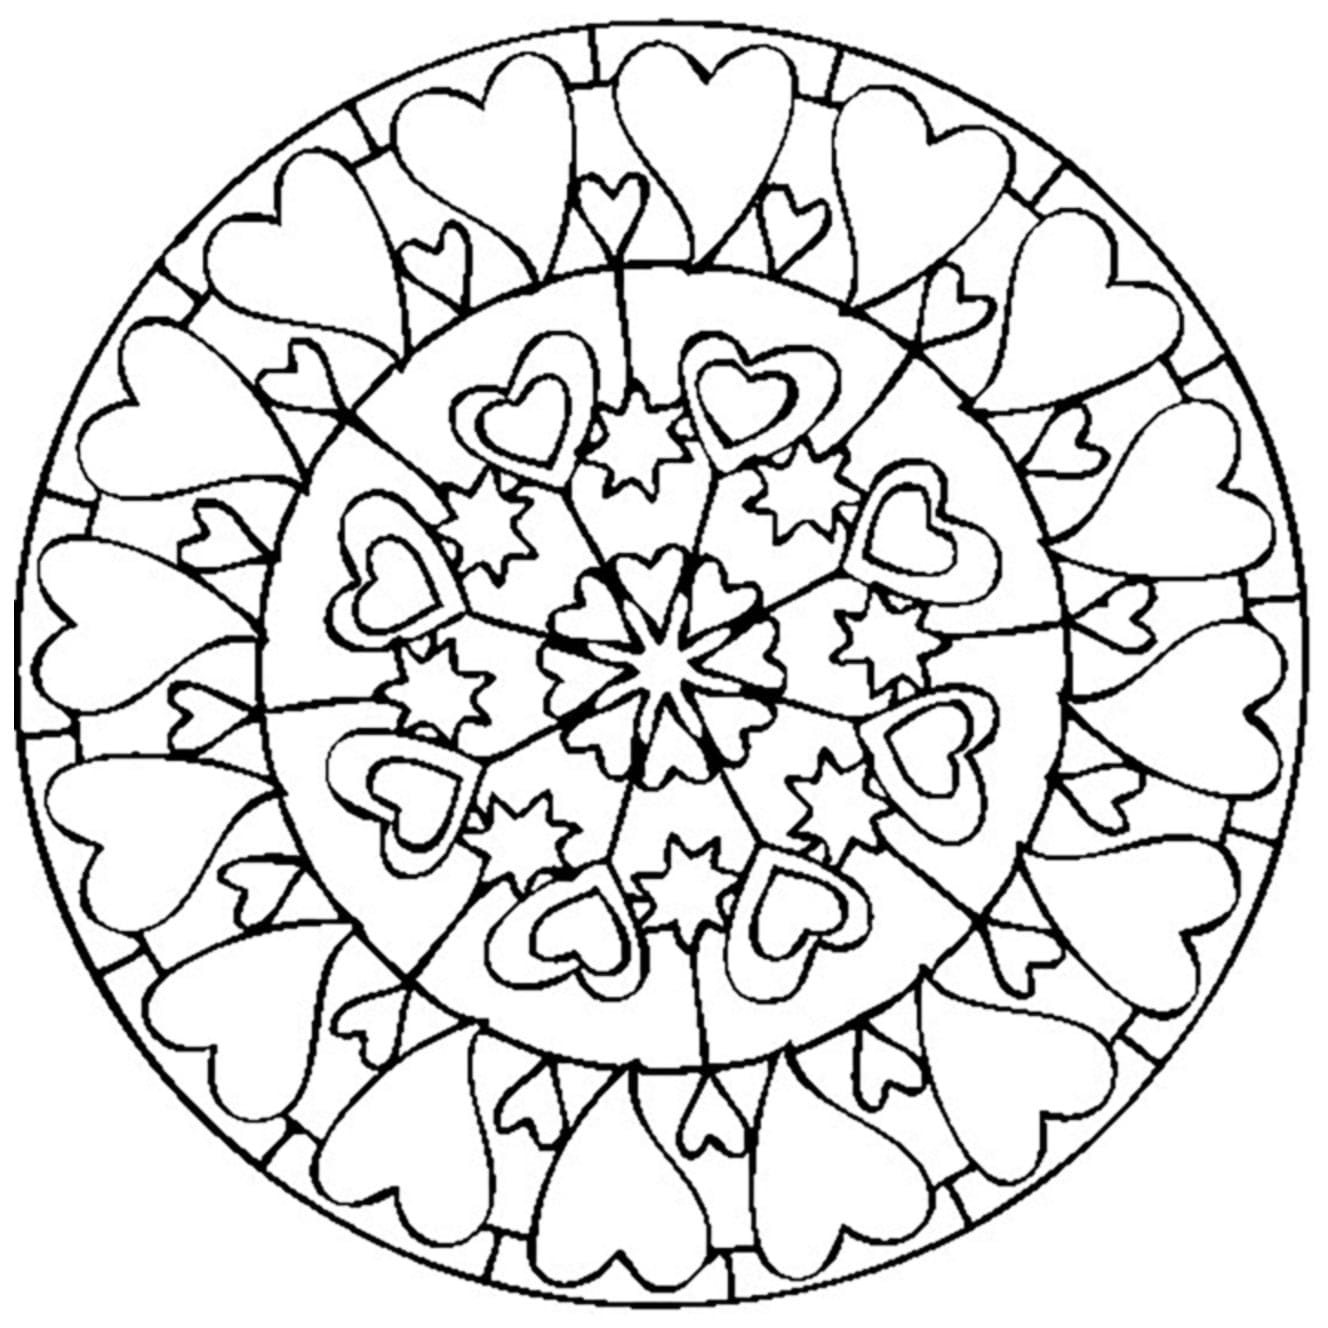 The Love Mandala Perfect for Valentine’s Day Coloring Page